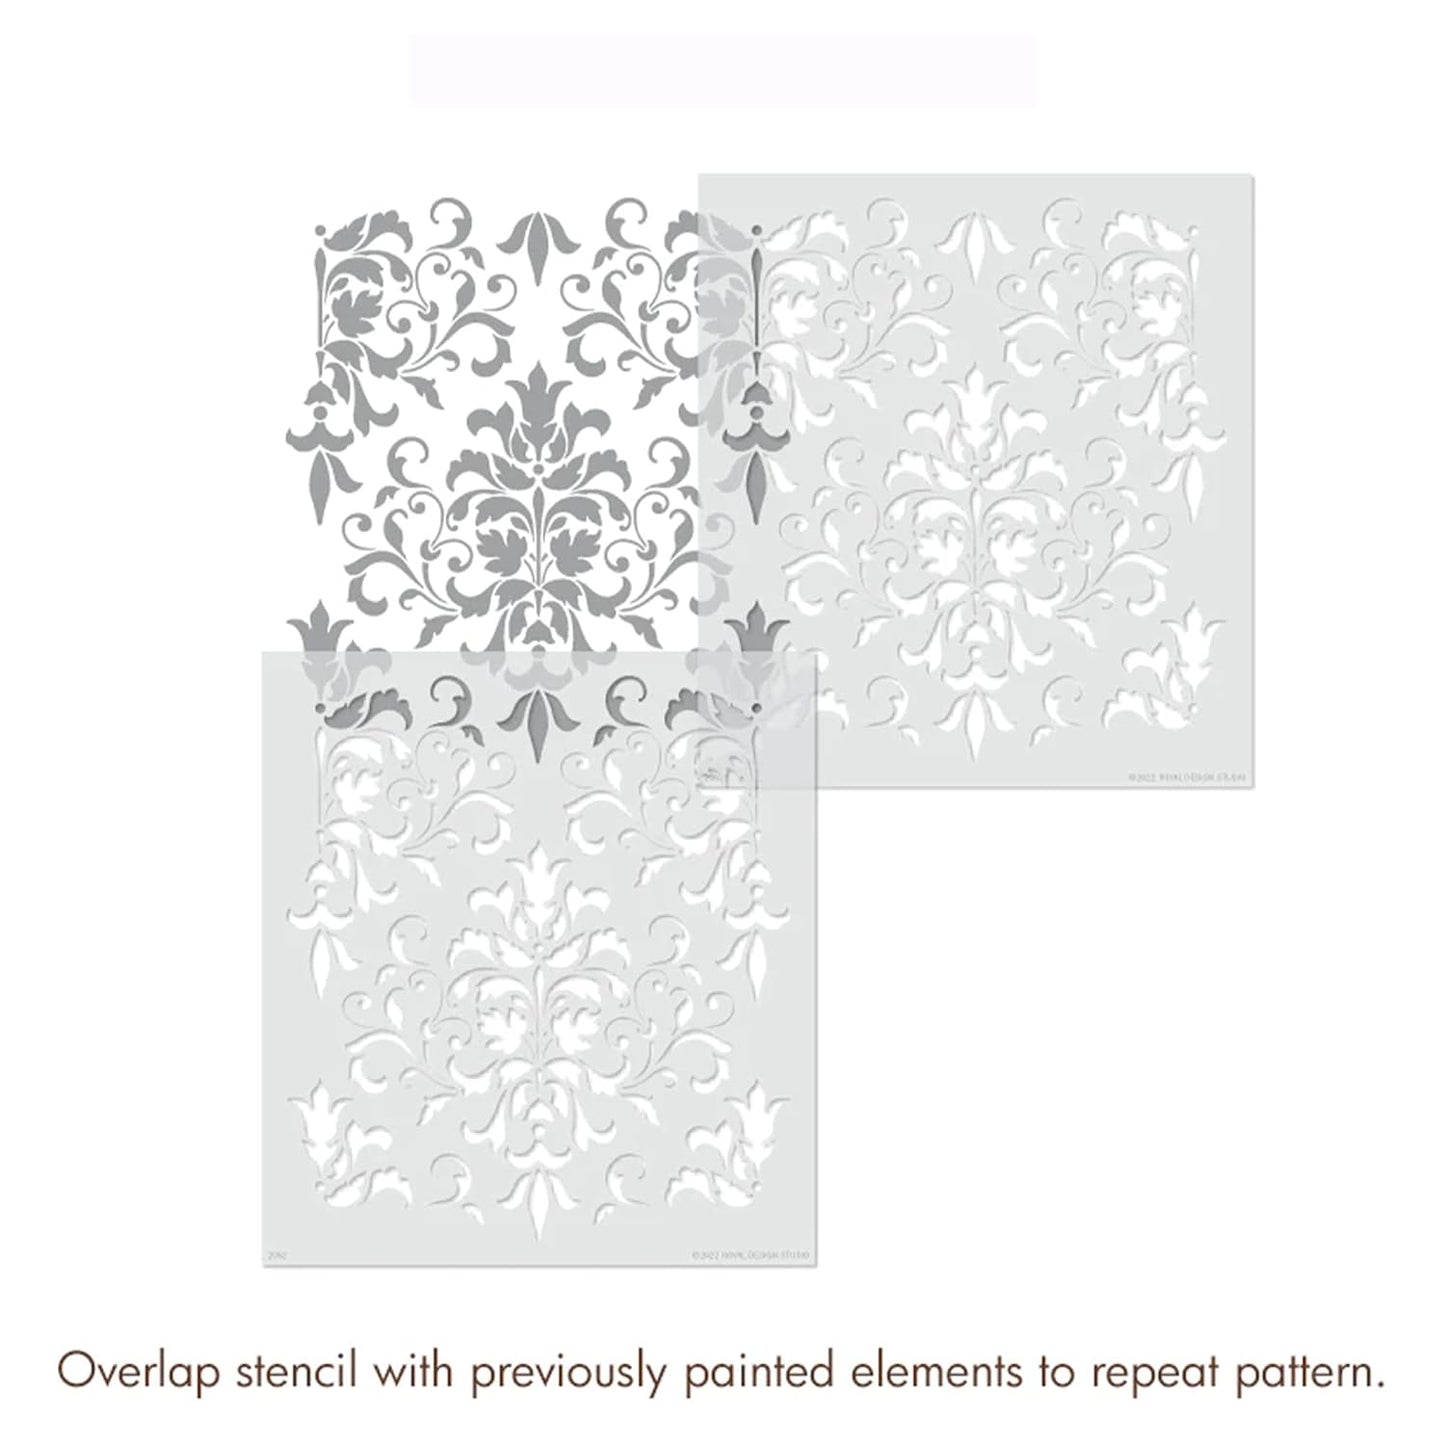 Latest Flourishing Damask Stencils for Wall Painting - Pack of 1, Sheet Size 24 x 27.5 inch/Design for Wall Painting 22 x 25.5 inch - Large